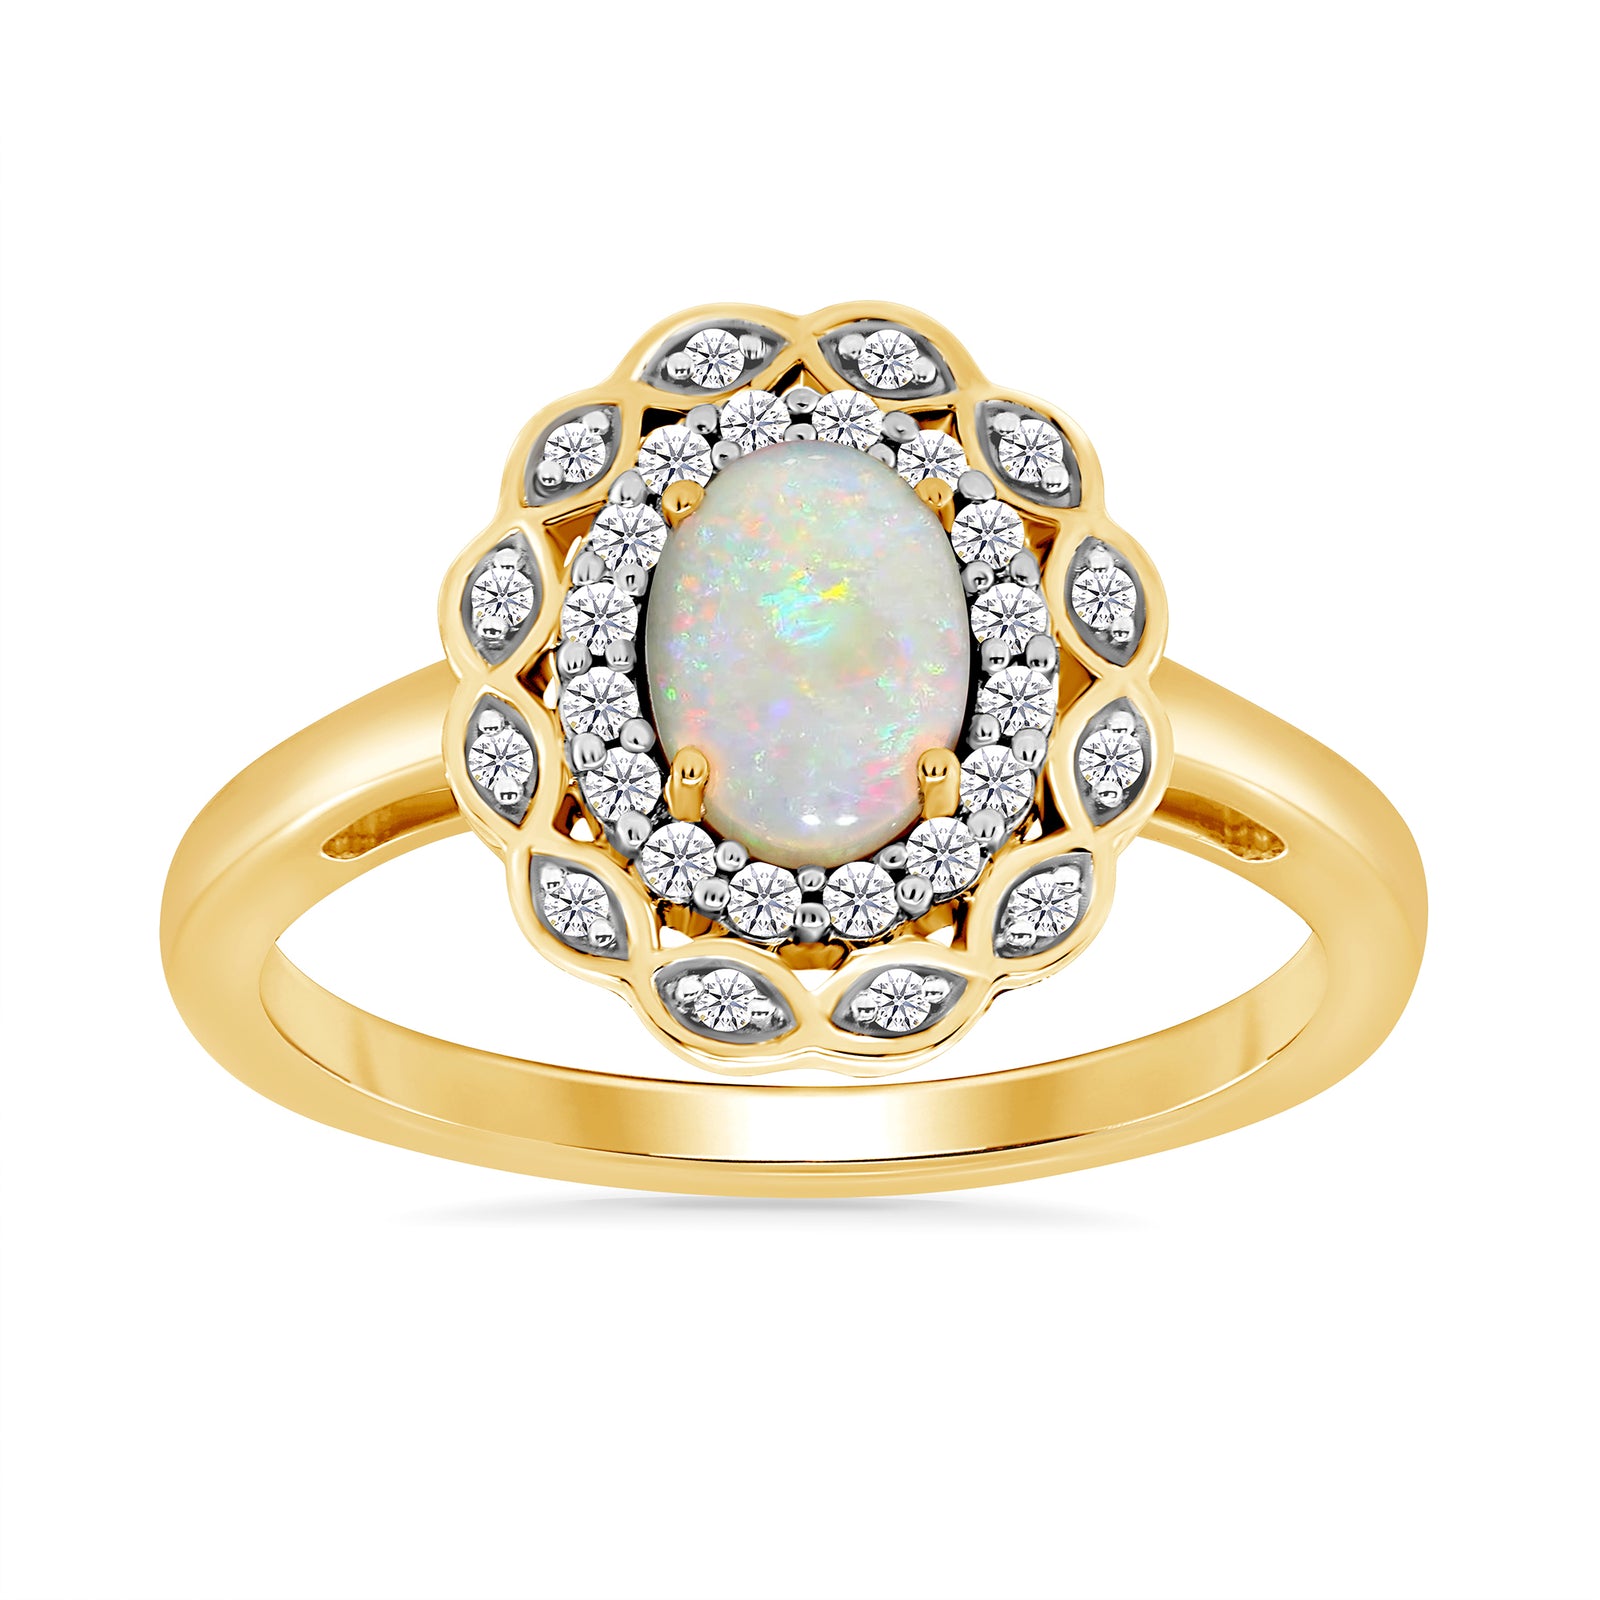 9ct gold 7x5mm oval opal & two row diamond cluster ring 0.16ct